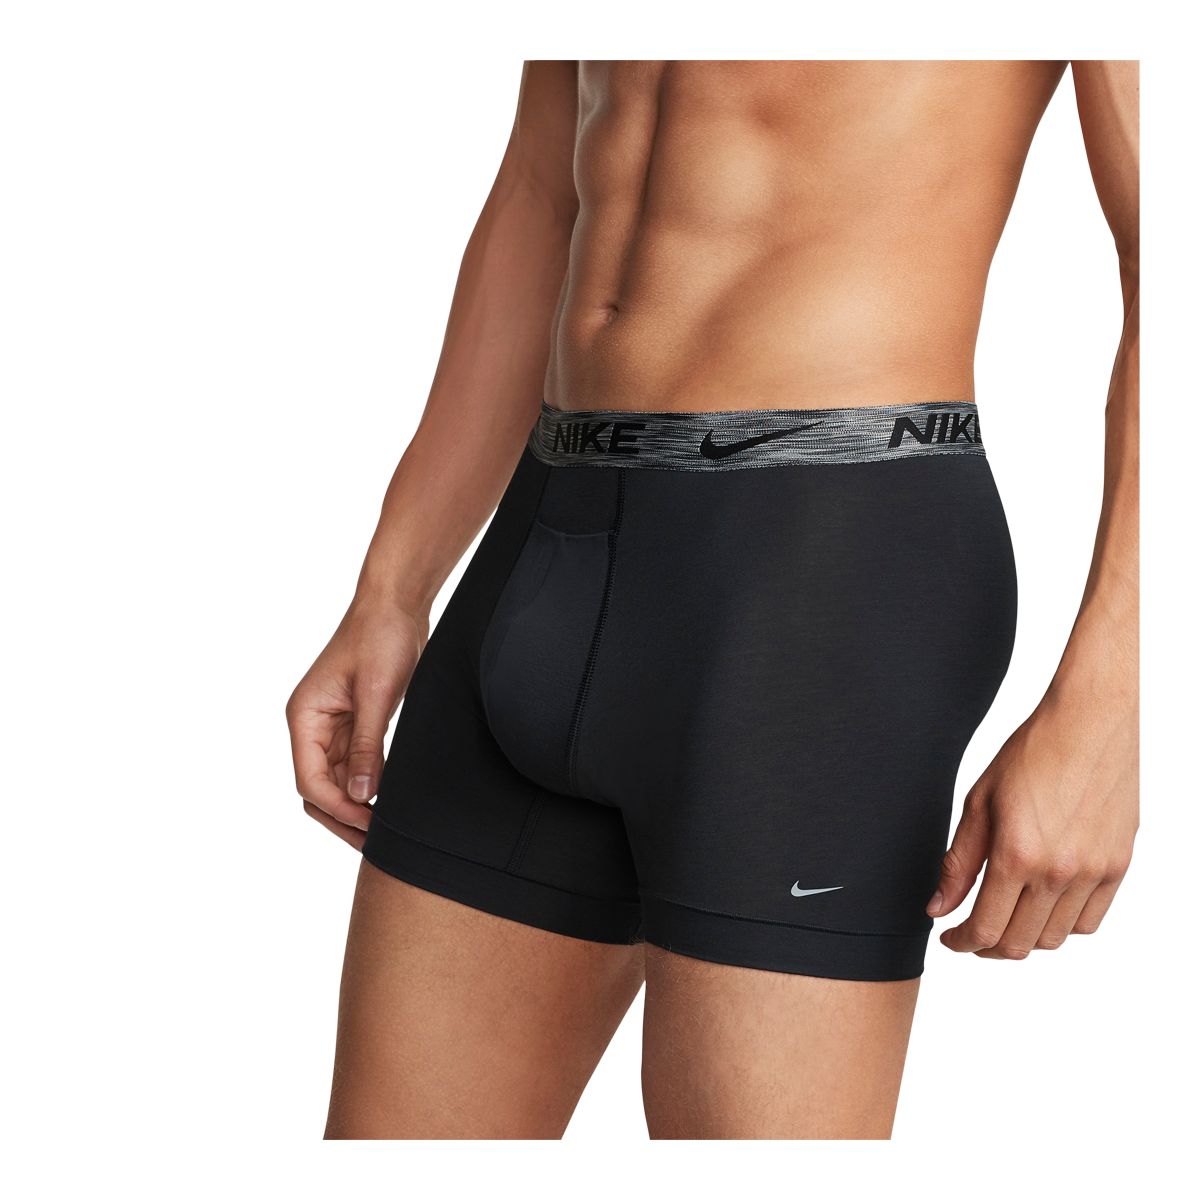 https://media-www.sportchek.ca/product/div-03-softgoods/dpt-79-clothing-accessories/sdpt-01-mens/333612269/nike-dri-fit-reluxe-boxer-brief-2pk-721-gry-gry-bf000676-3954-4a7d-9601-a951f0bb3986-jpgrendition.jpg?imdensity=1&imwidth=1244&impolicy=mZoom